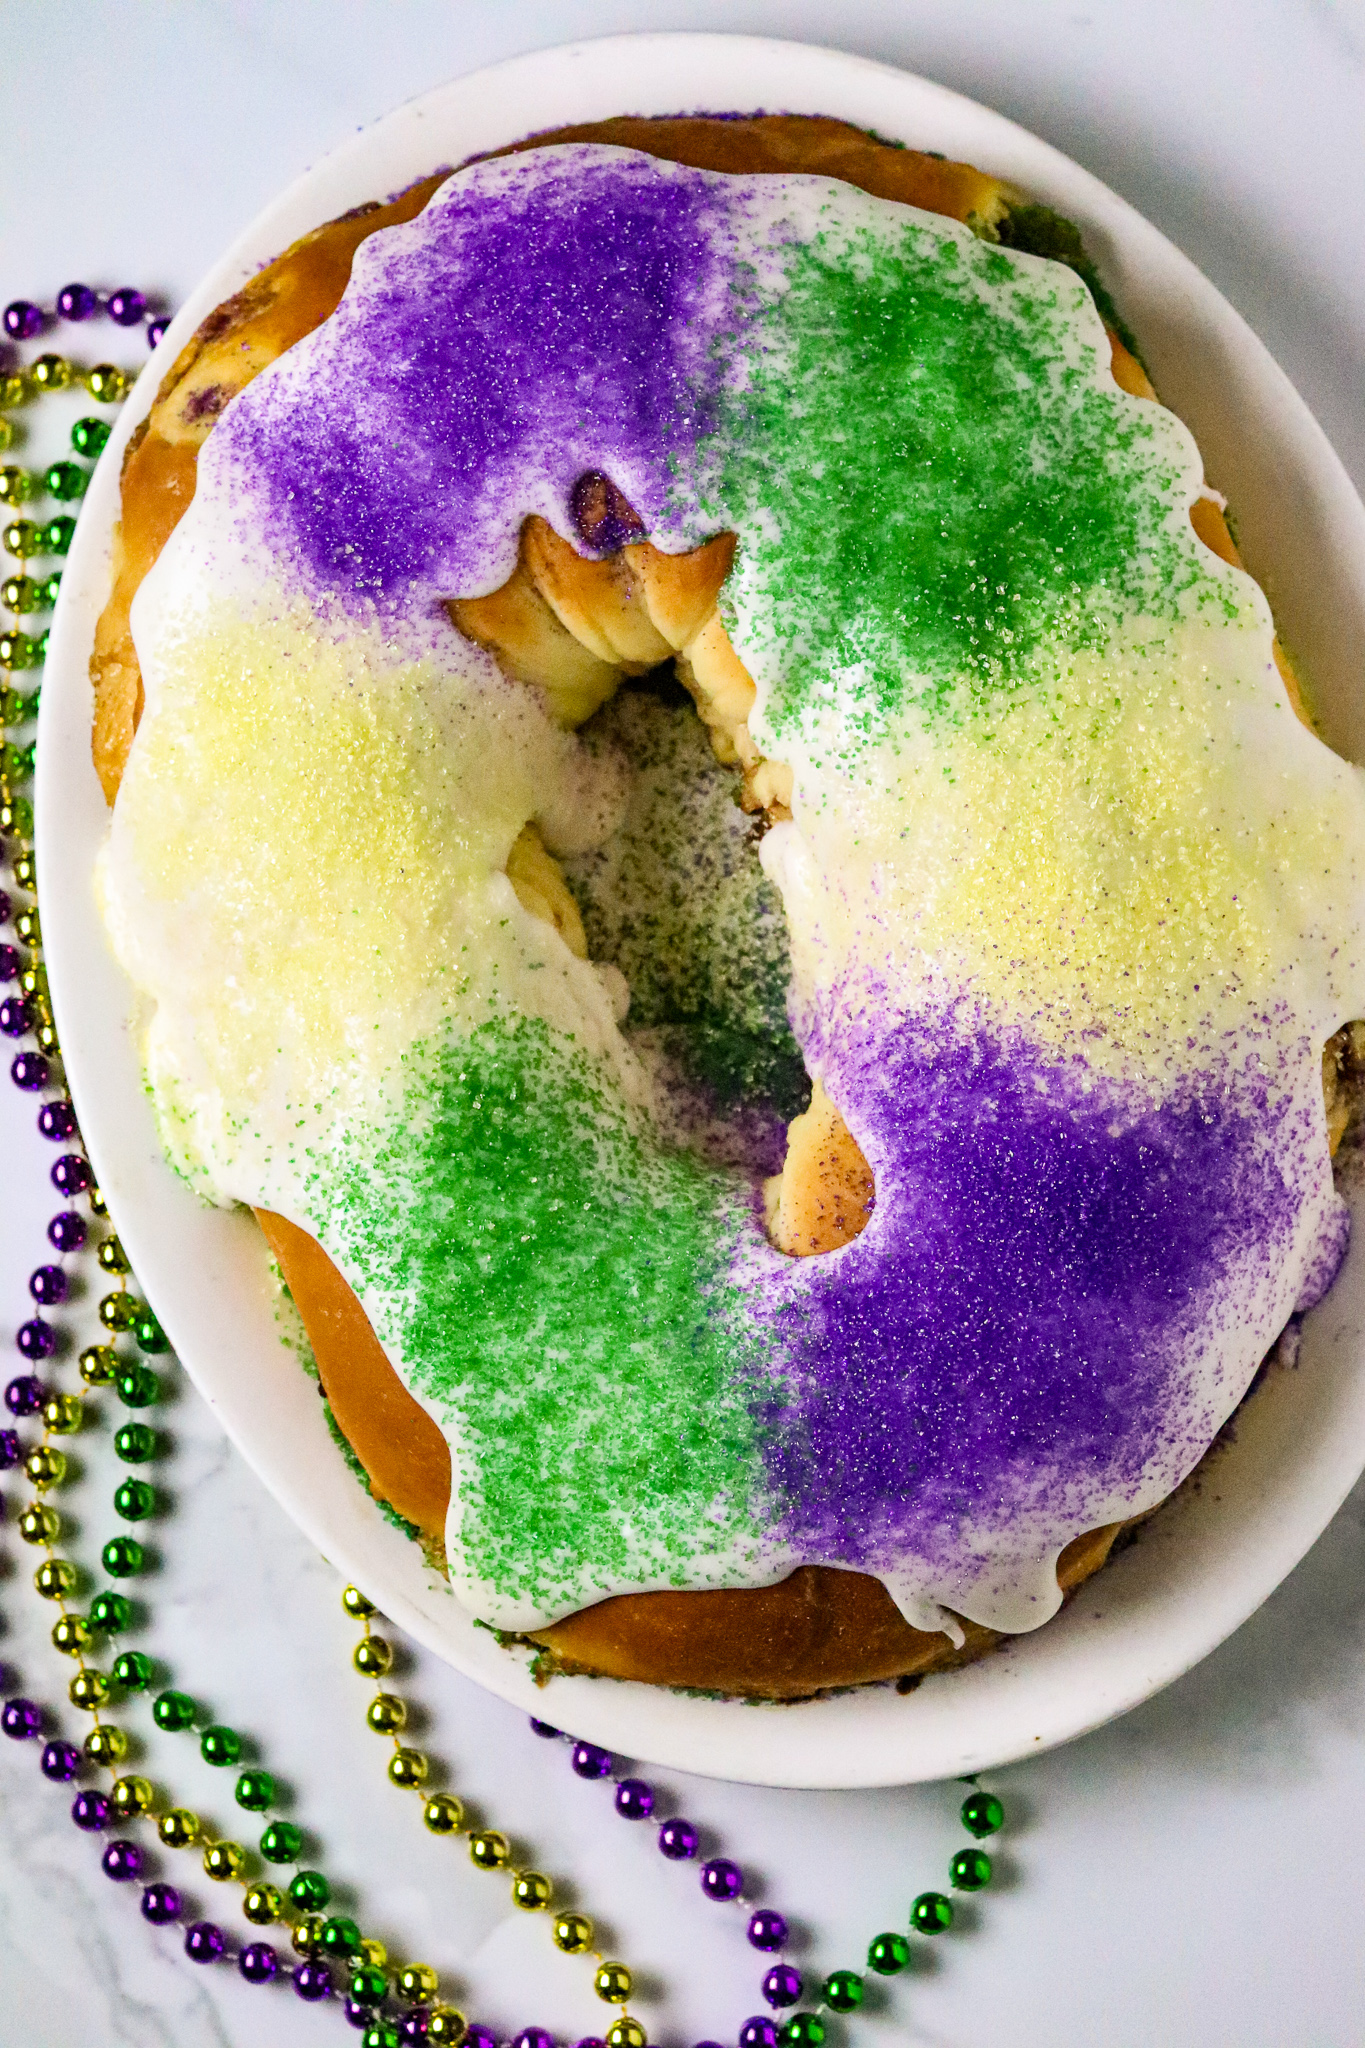 King cakes are a great way to indulge before Lent - Los Angeles Times